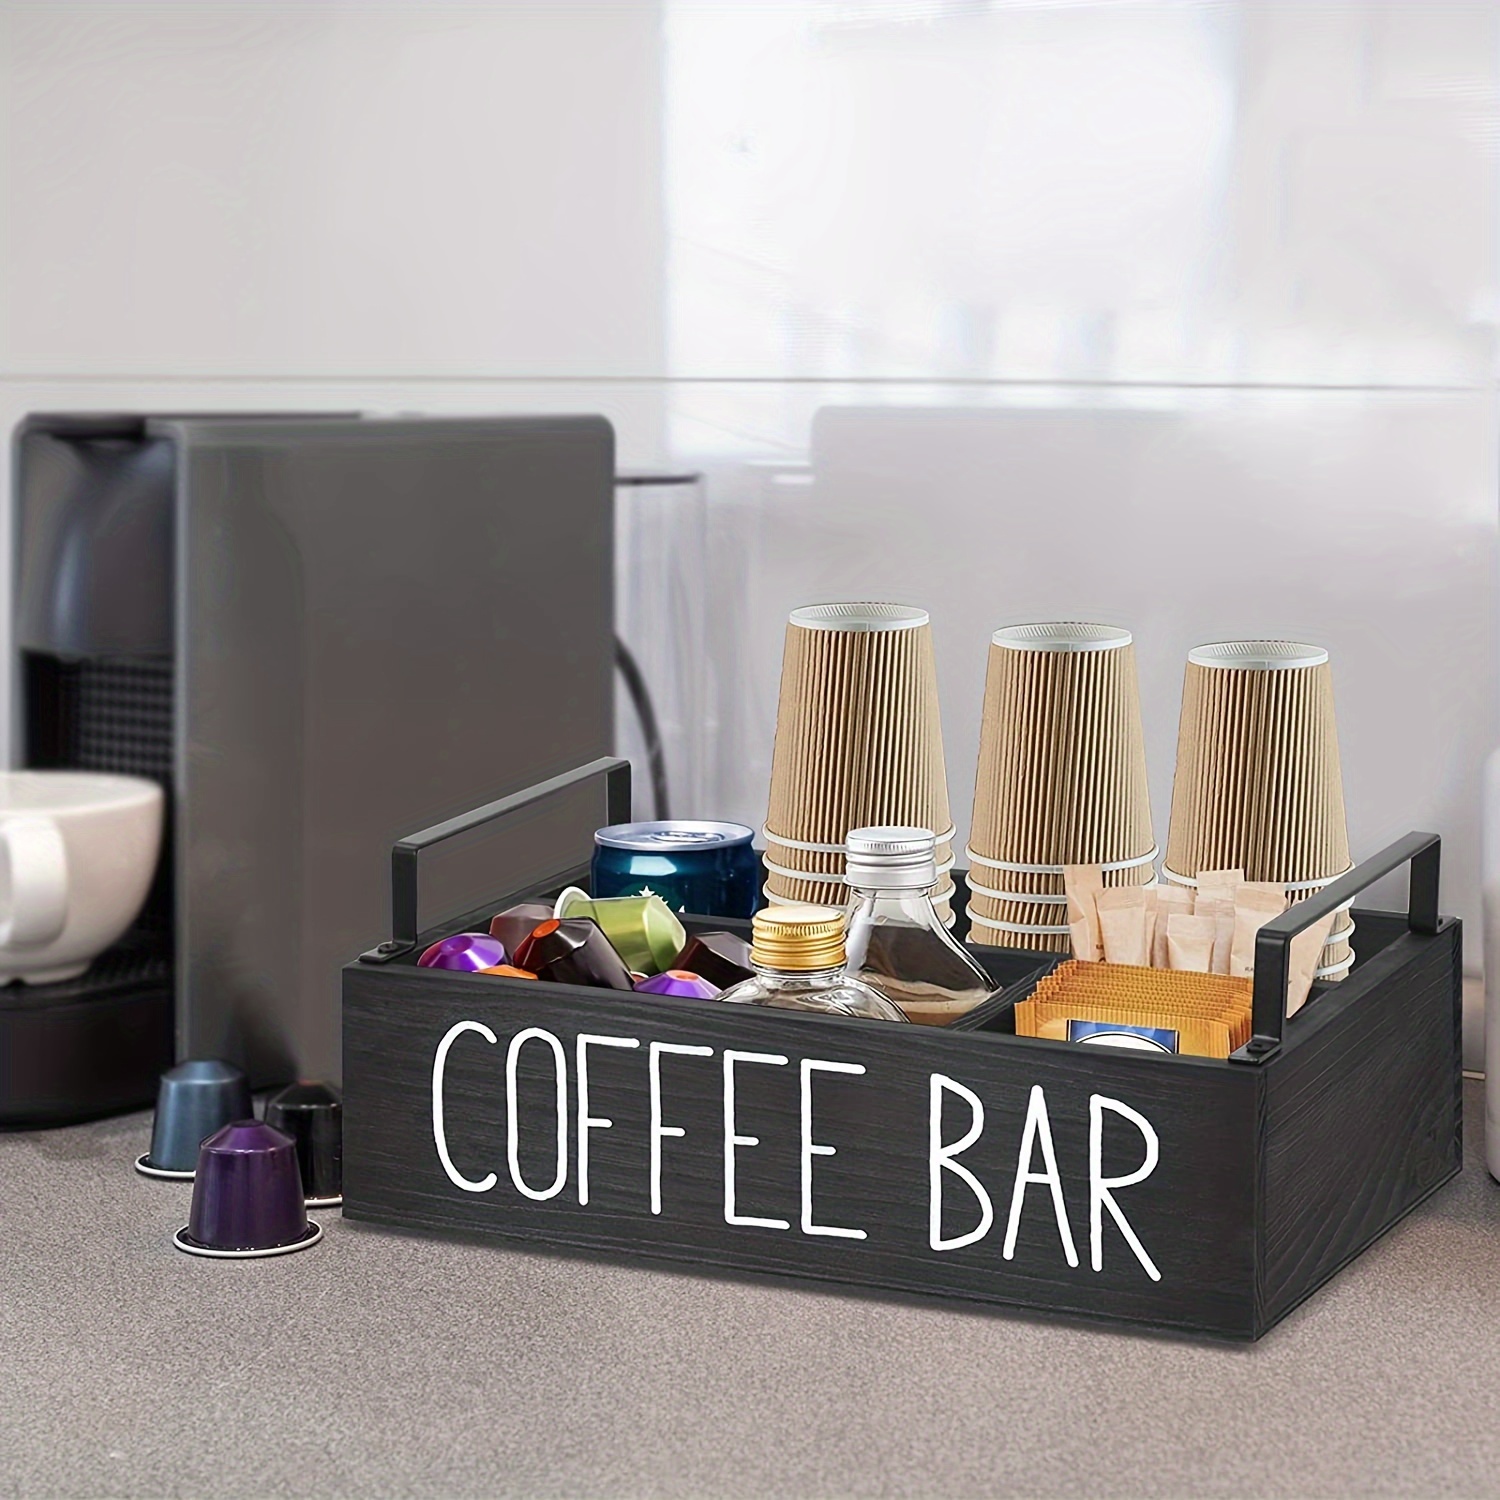  Made Easy Kit Coffee Pod Organizer - Home Coffee Bar Functional  Décor - Café Station Countertop Storage Accessories (Pink Pig) : Home &  Kitchen